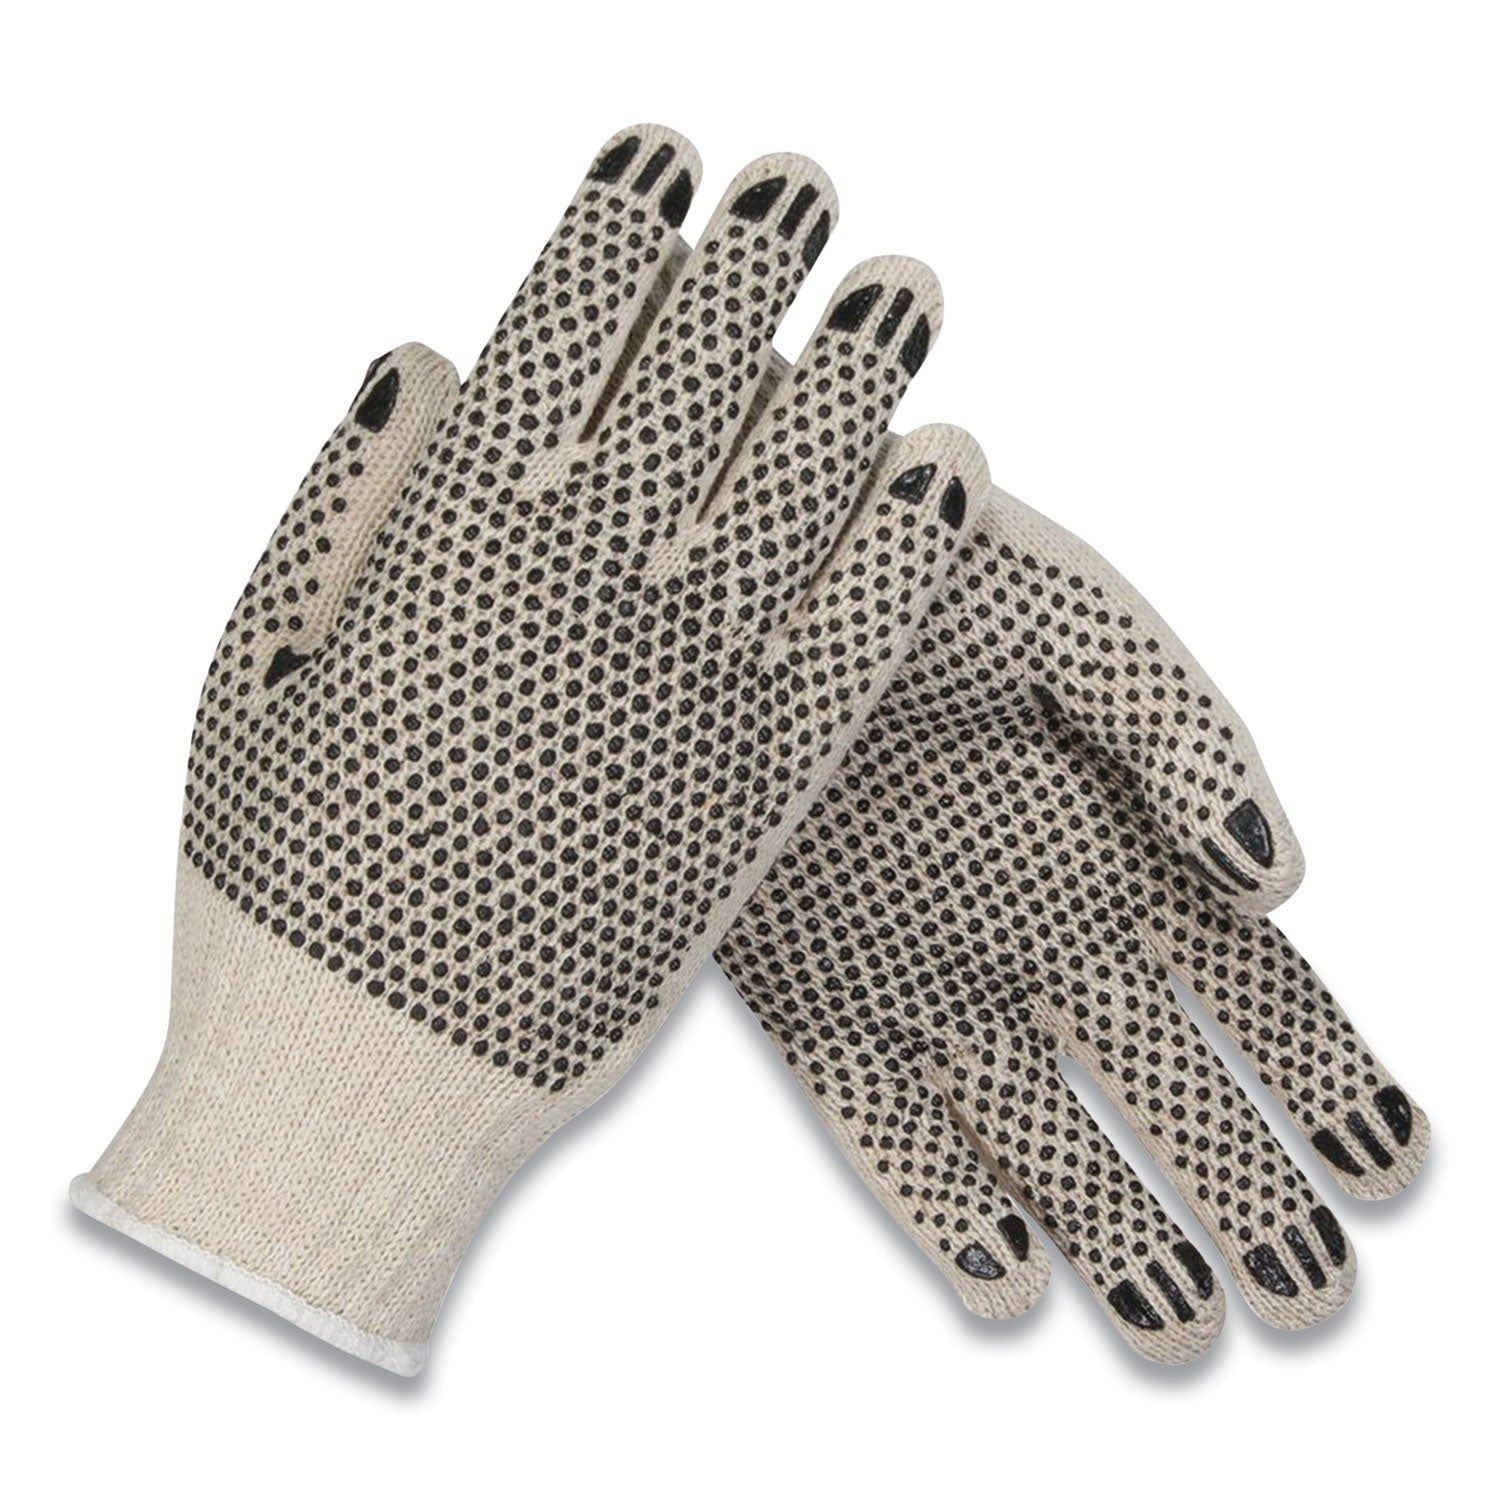 pvc-dotted-cotton-polyester-work-gloves-small-gray-black-12-pairs_pid36110pdds - 2